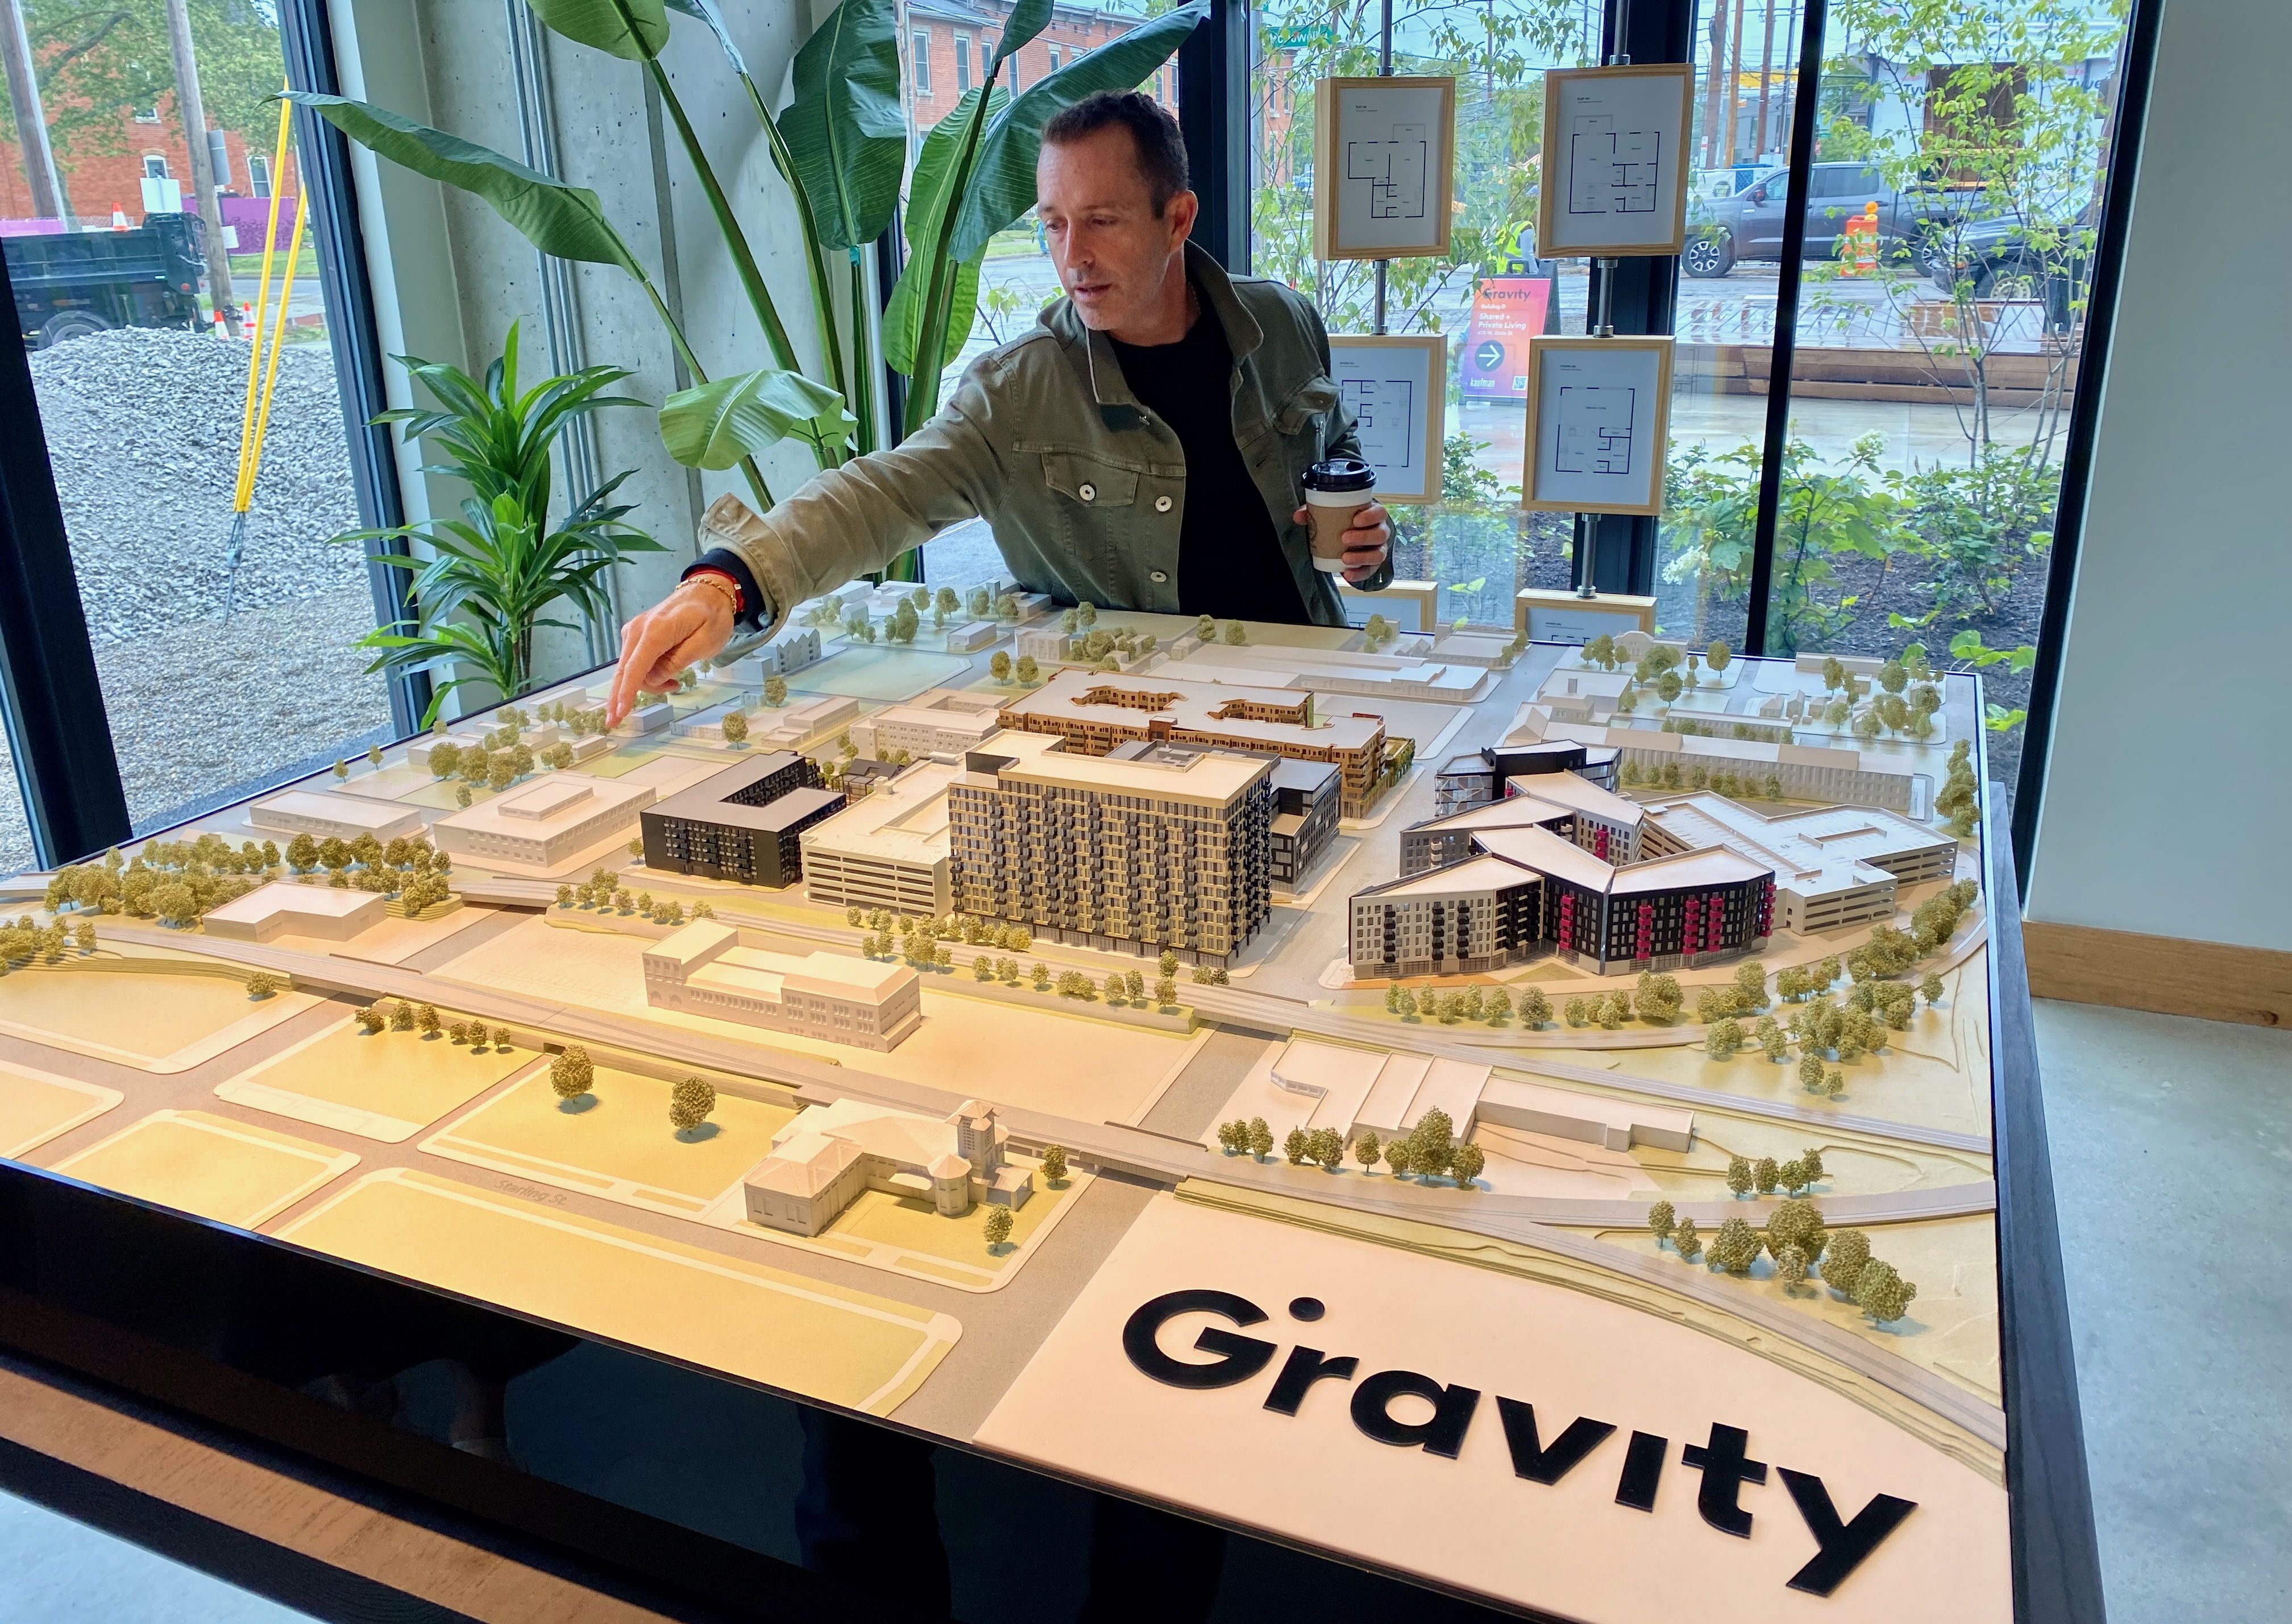 Brett Kaufman stands pointing over a model of the Gravity development project